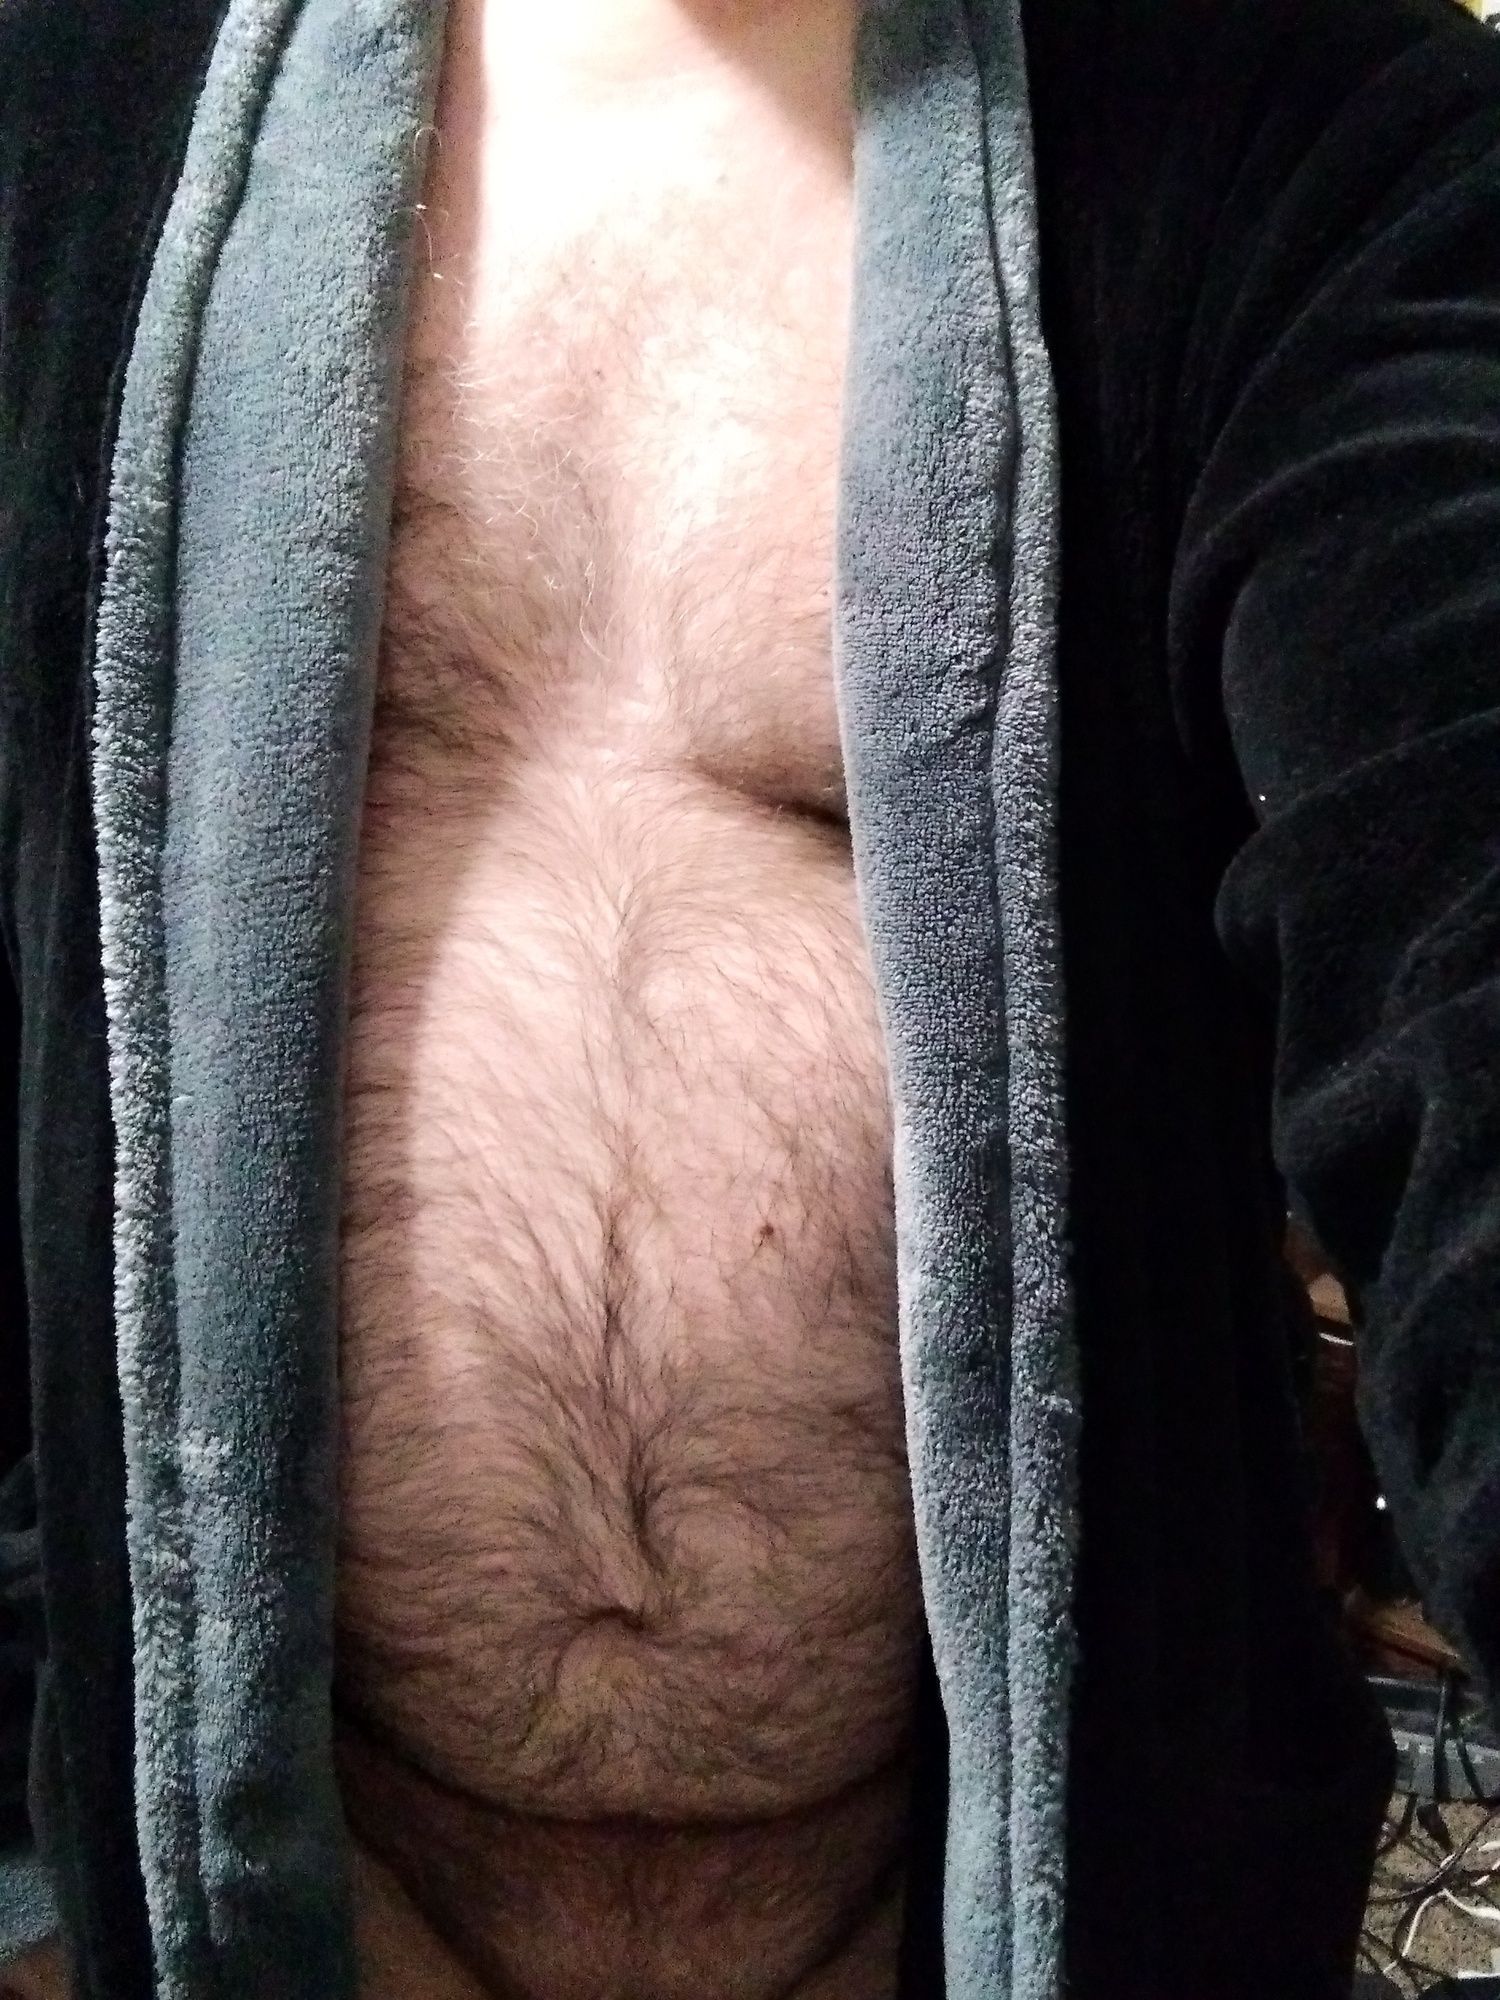 My hairy dad bod #8